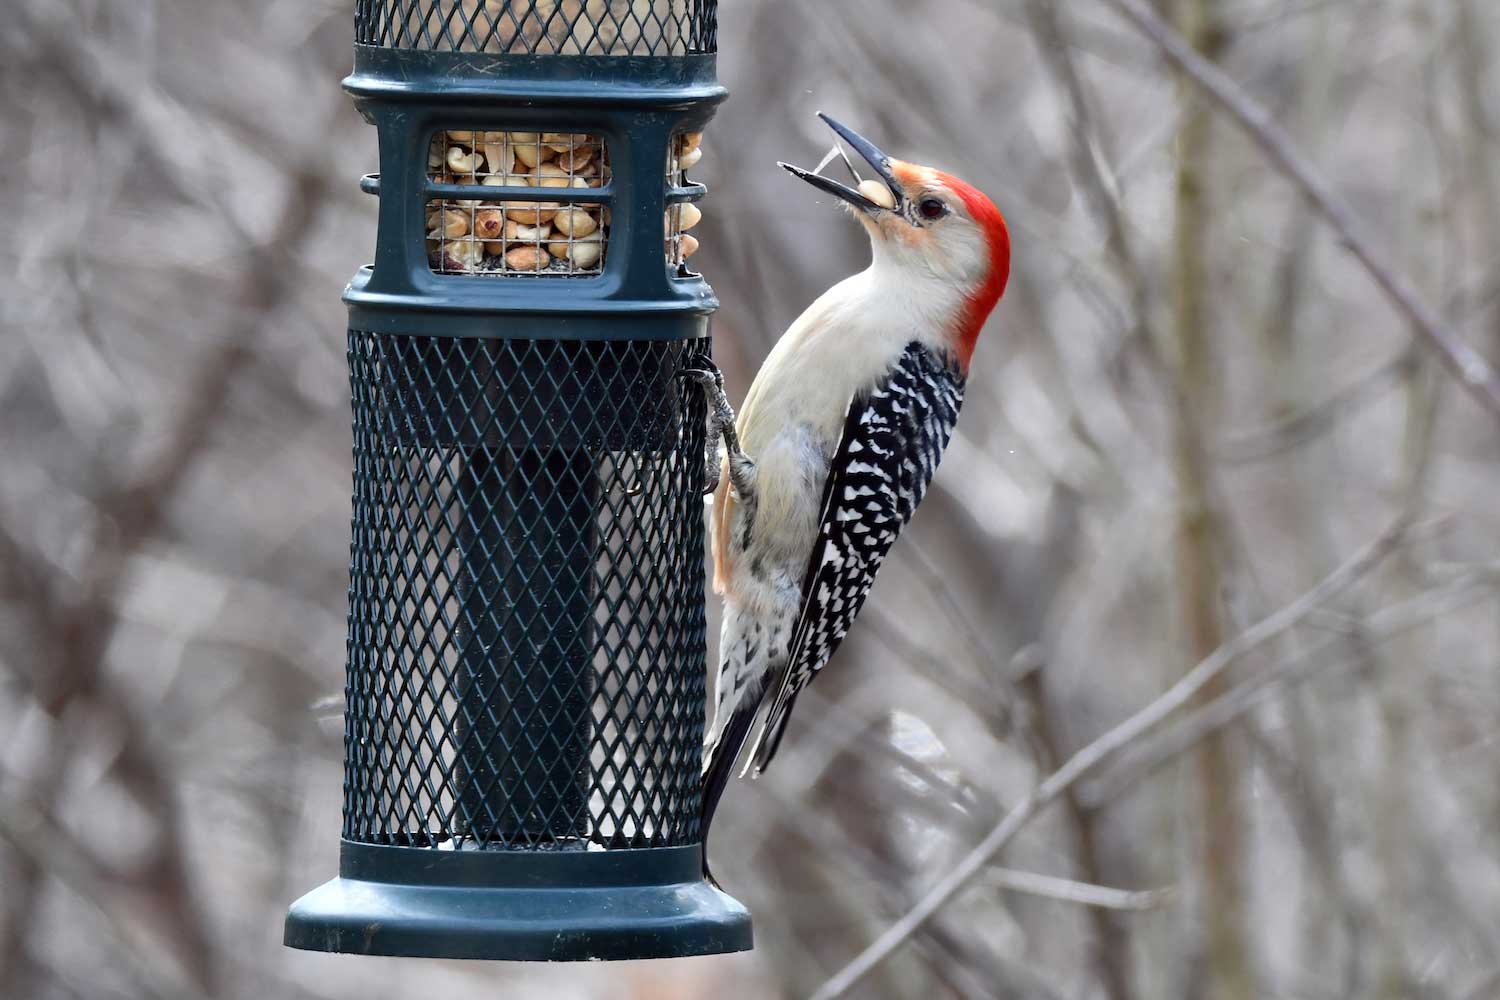 A red-bellied-woodpecker on a feeder with a seed in its mouth.